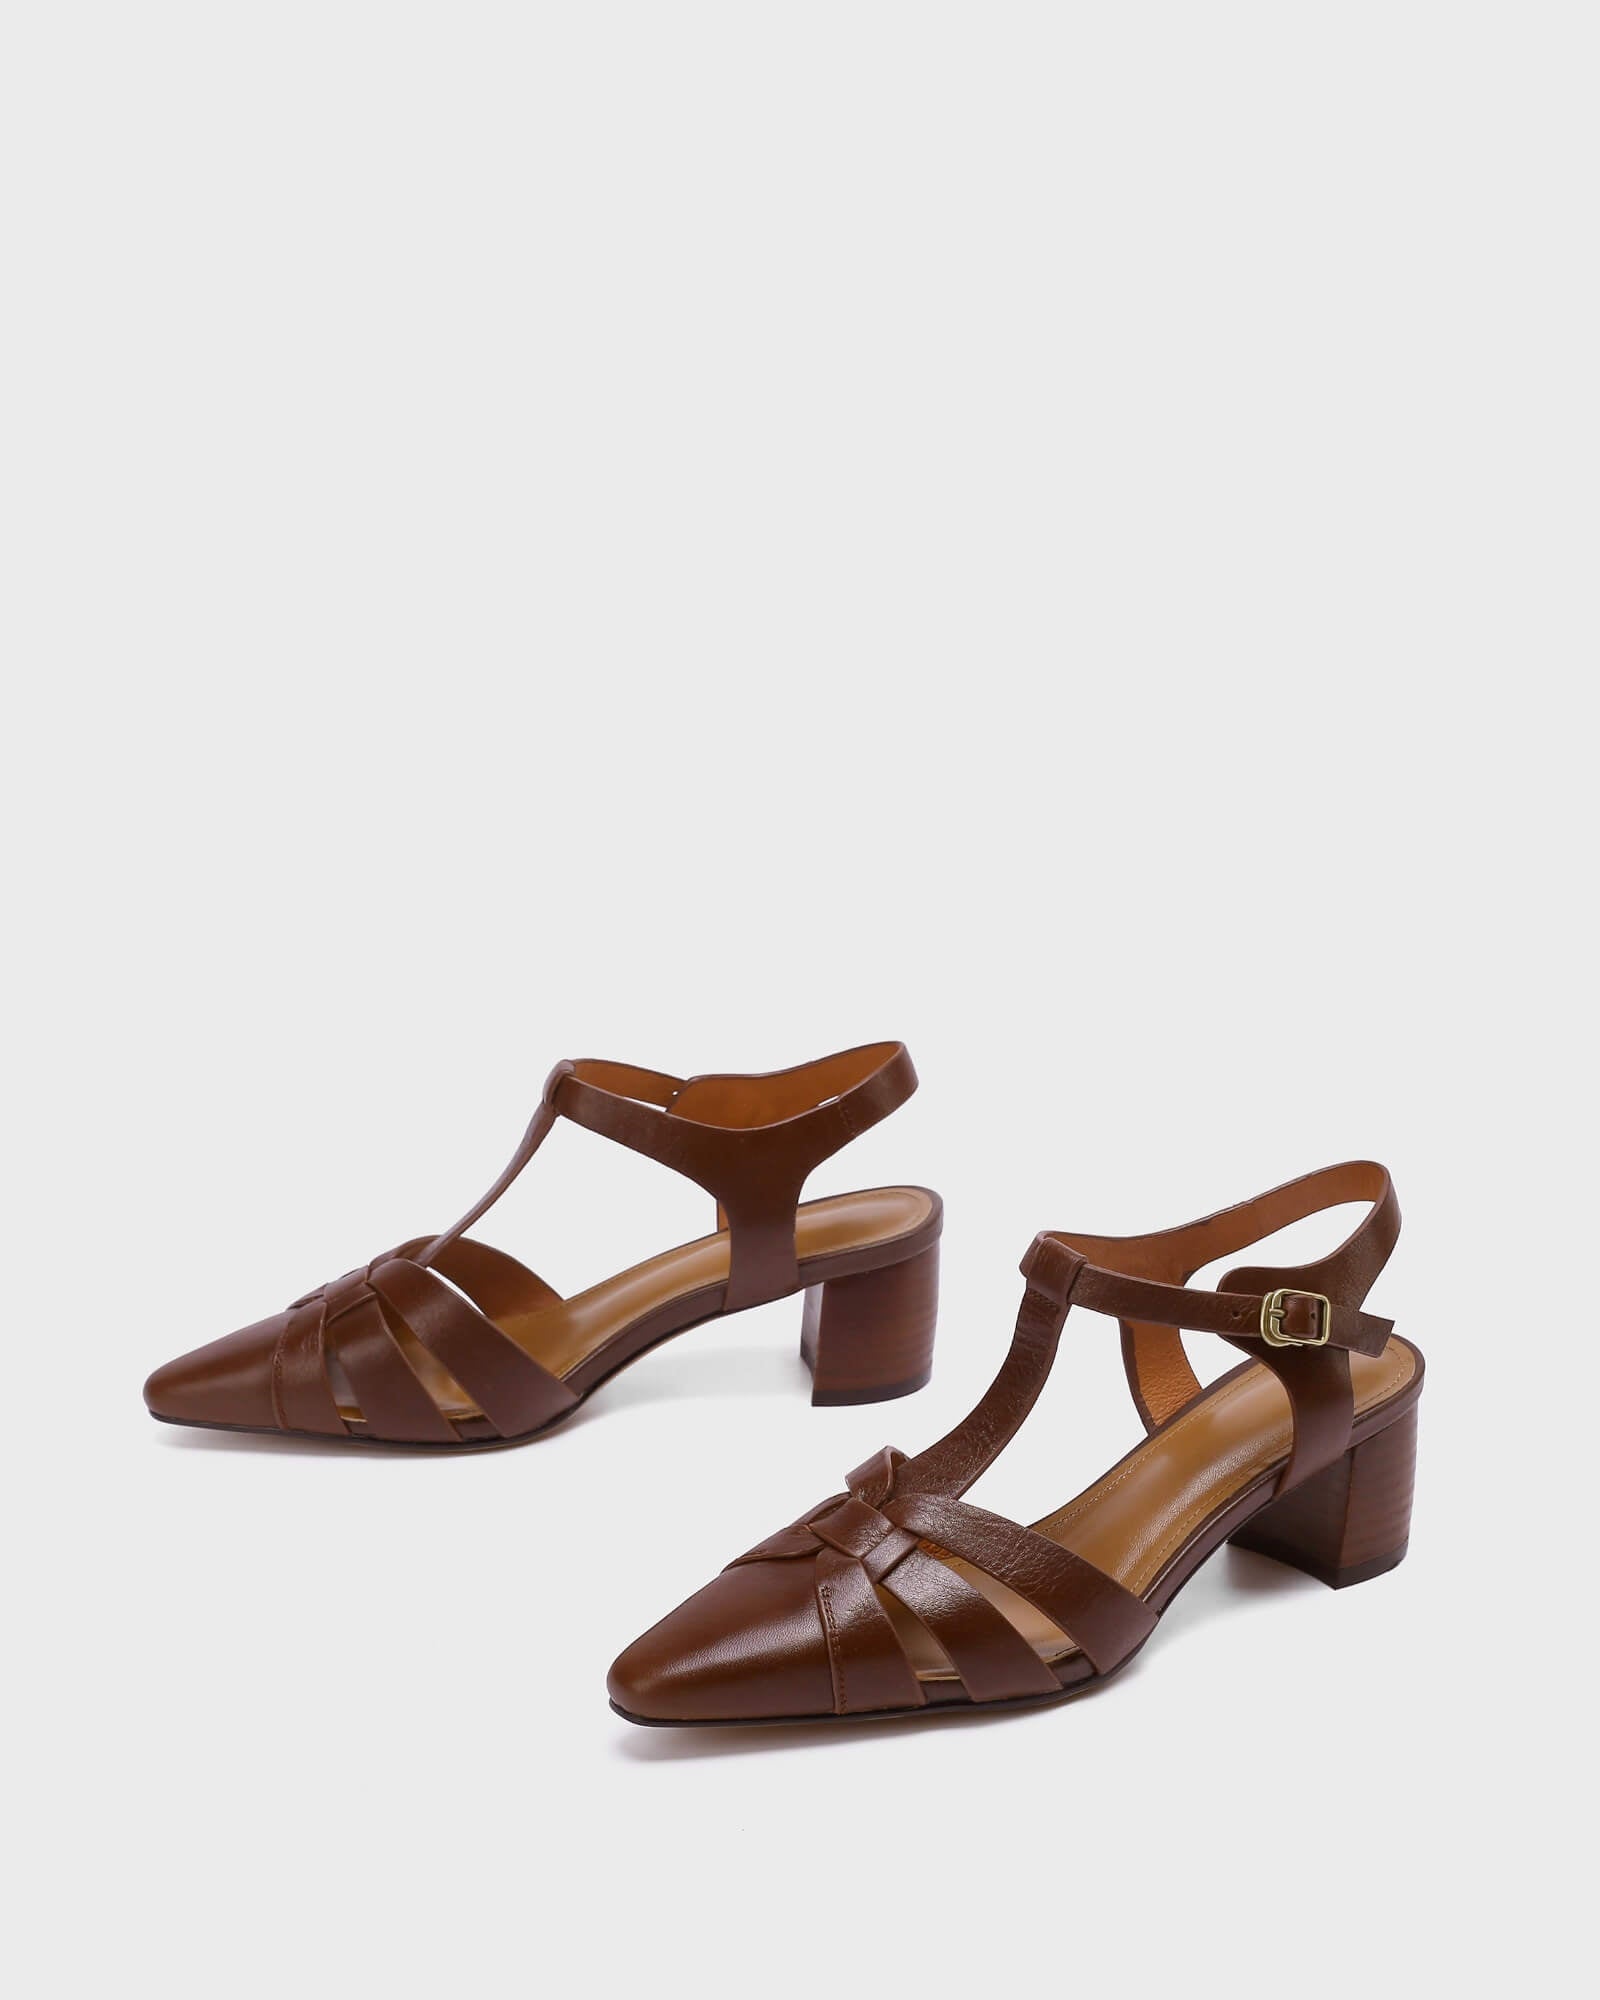 Mila-T-Strap-Brown-Leather-Pumps-1